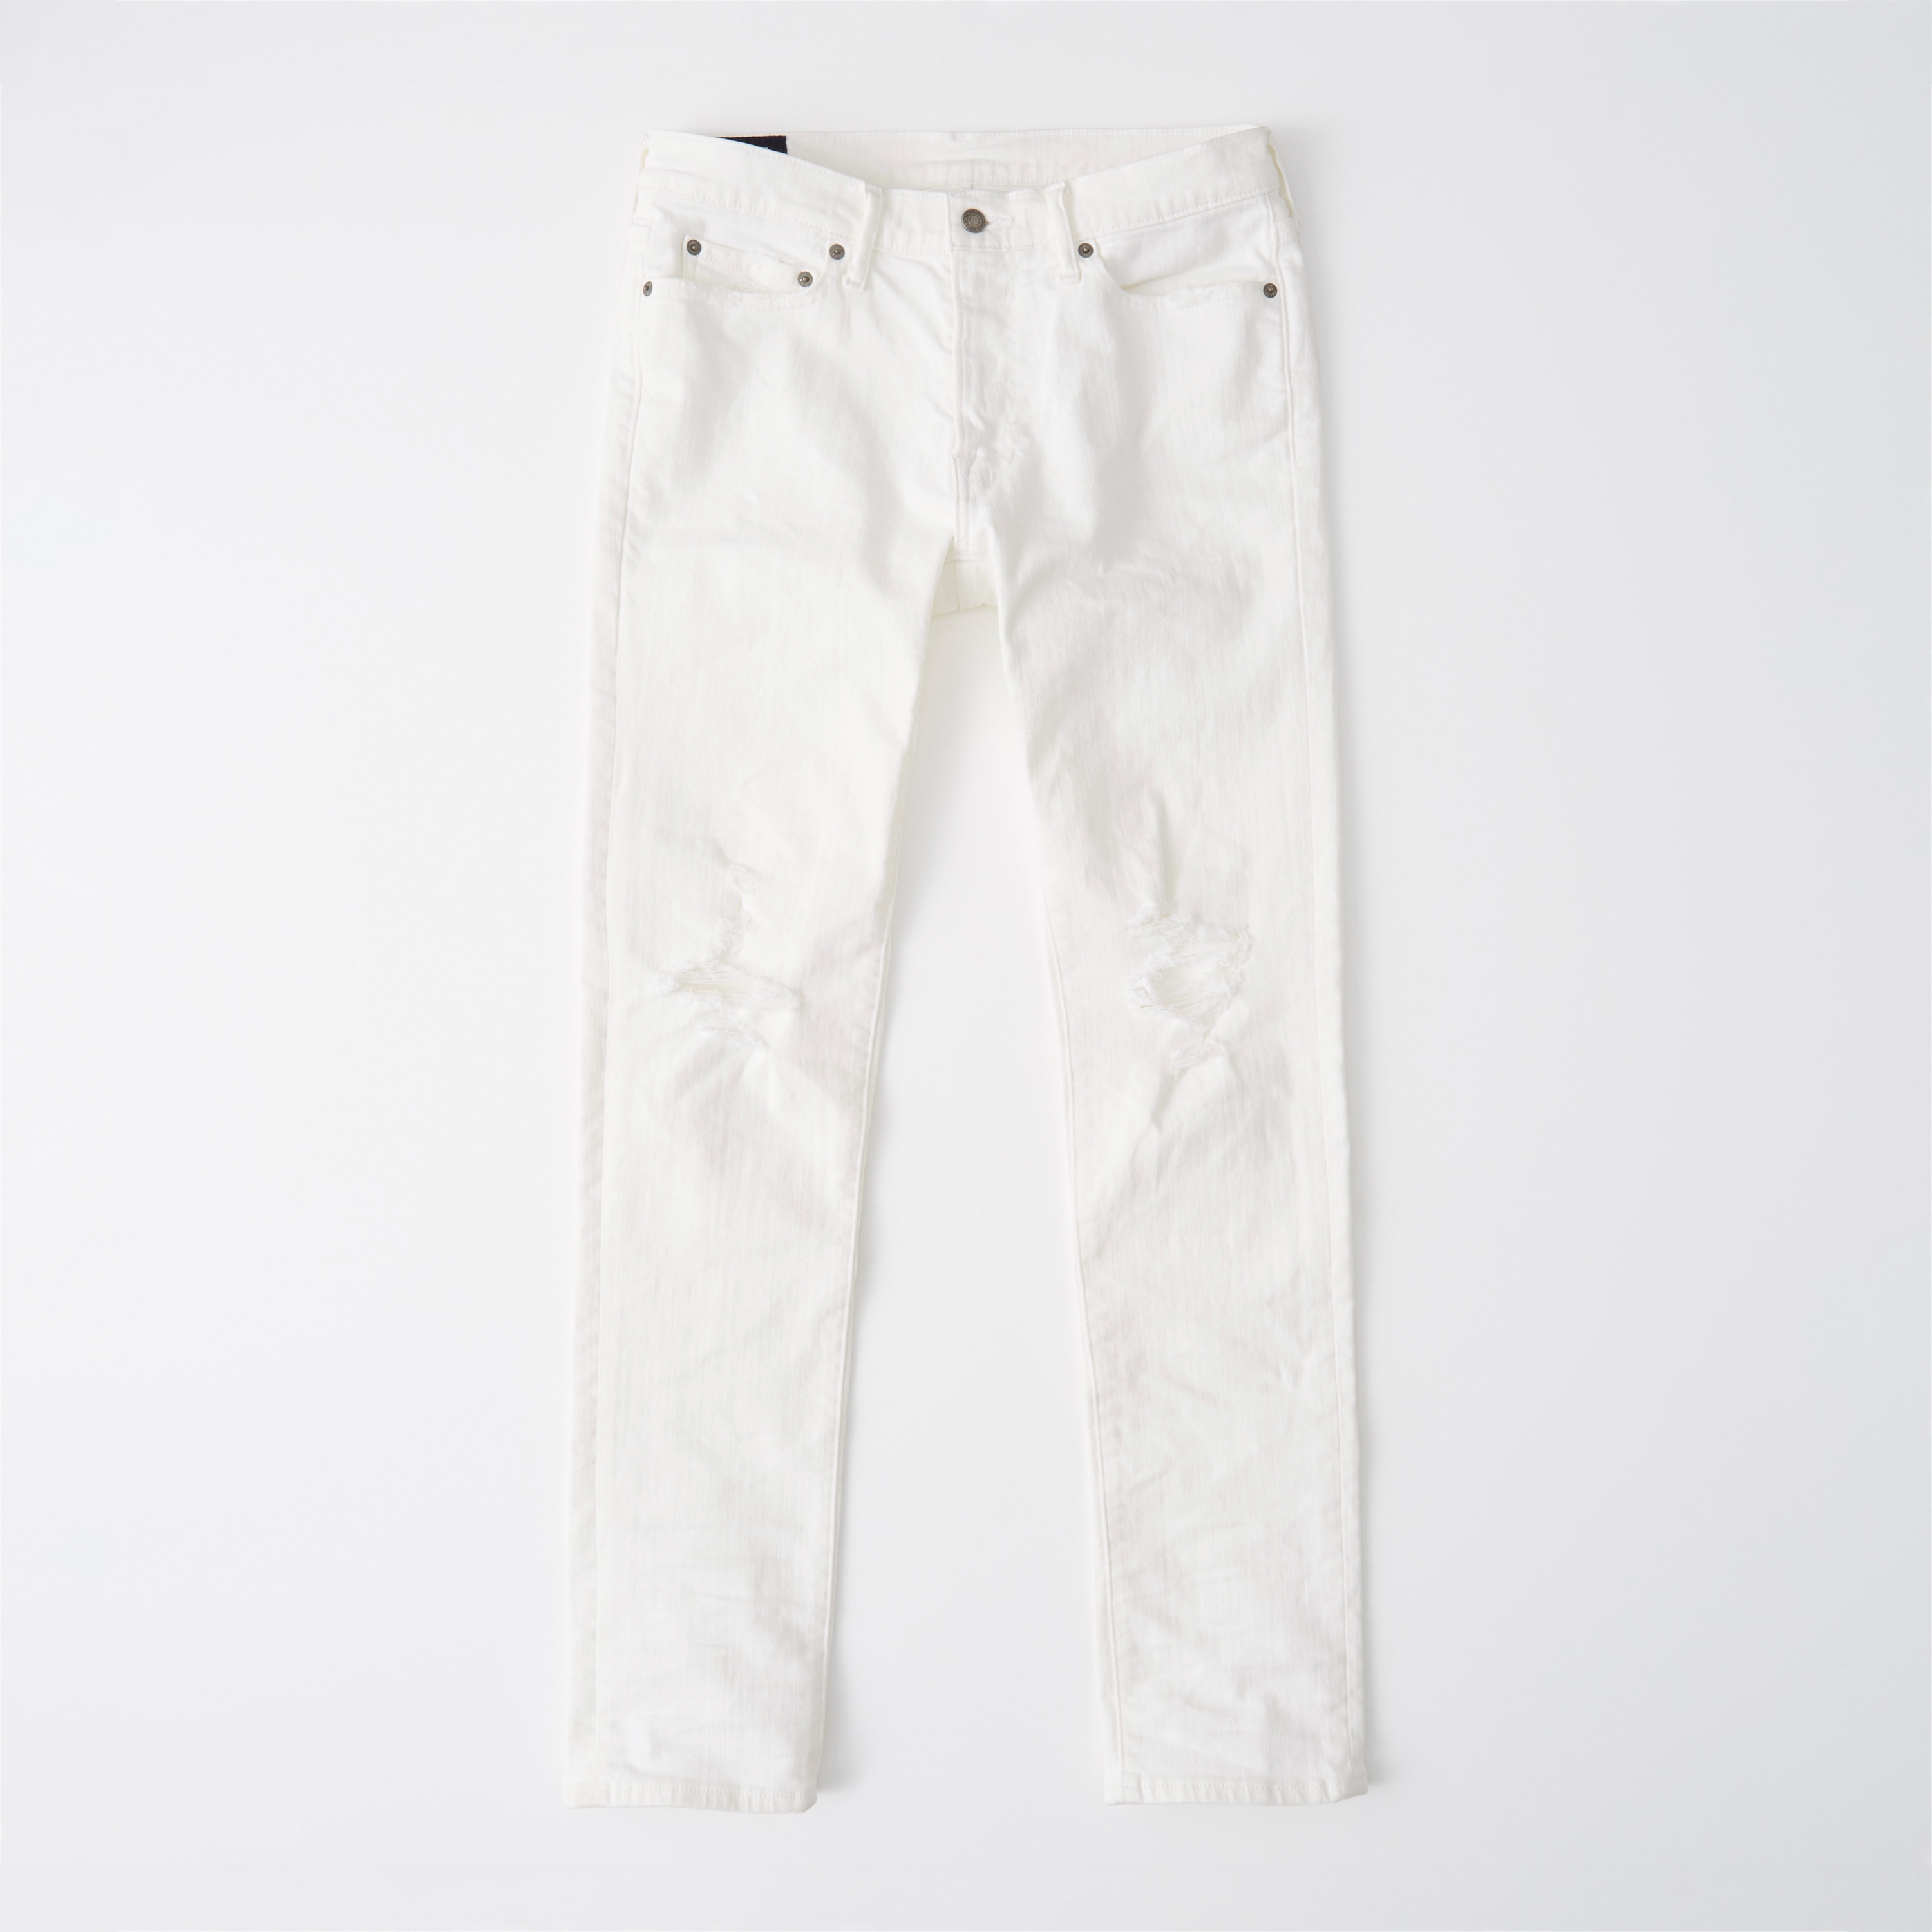 abercrombie and fitch athletic skinny jeans